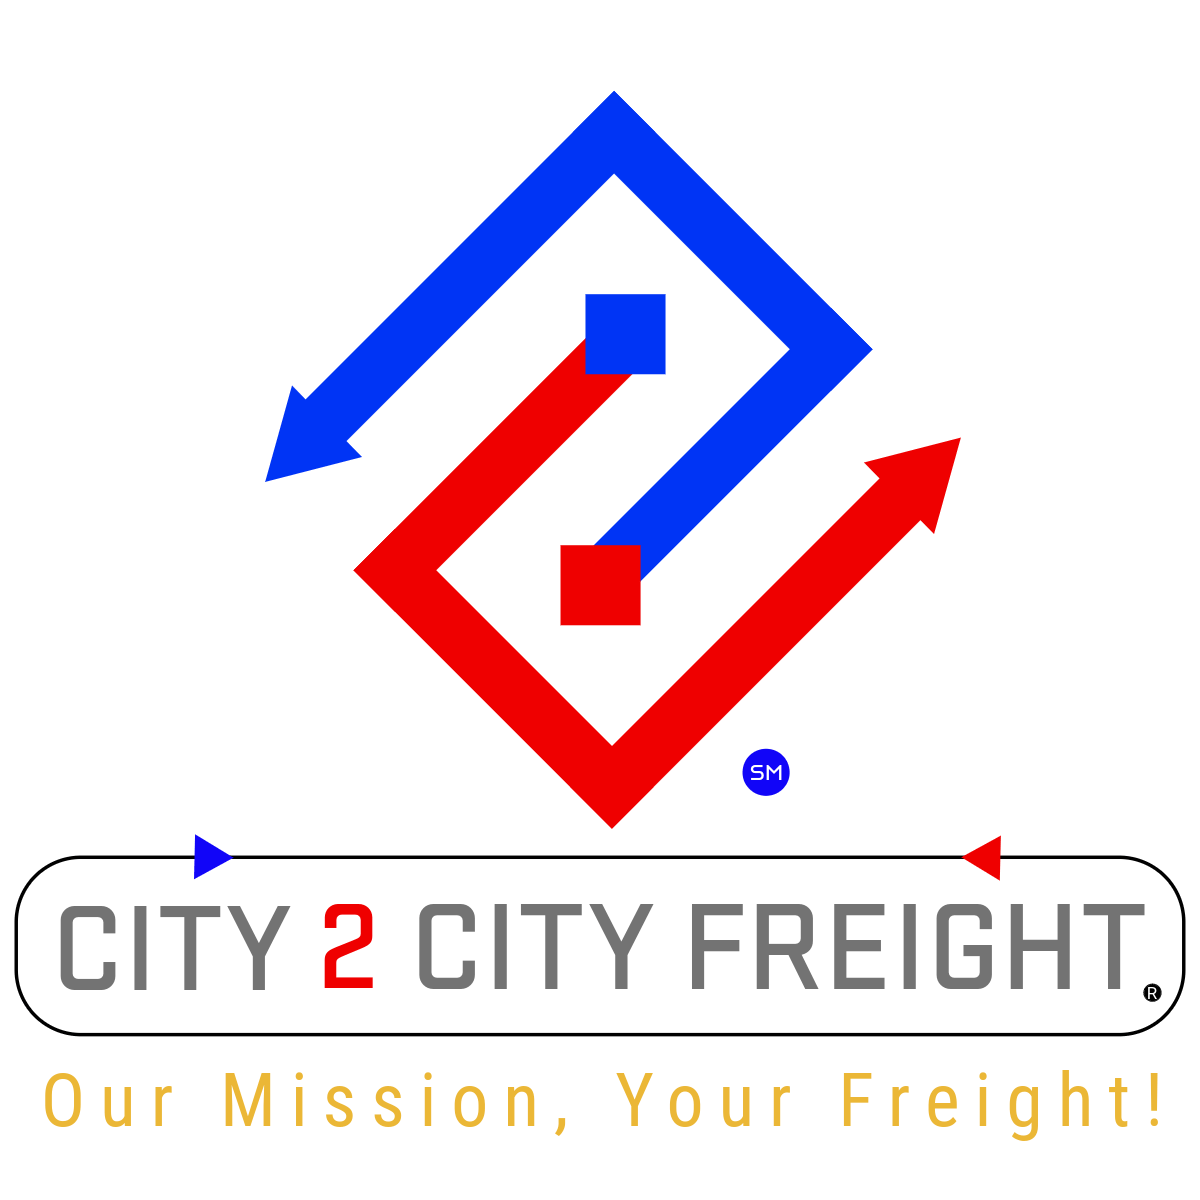 City 2 City Freight® -Logo service mark and name